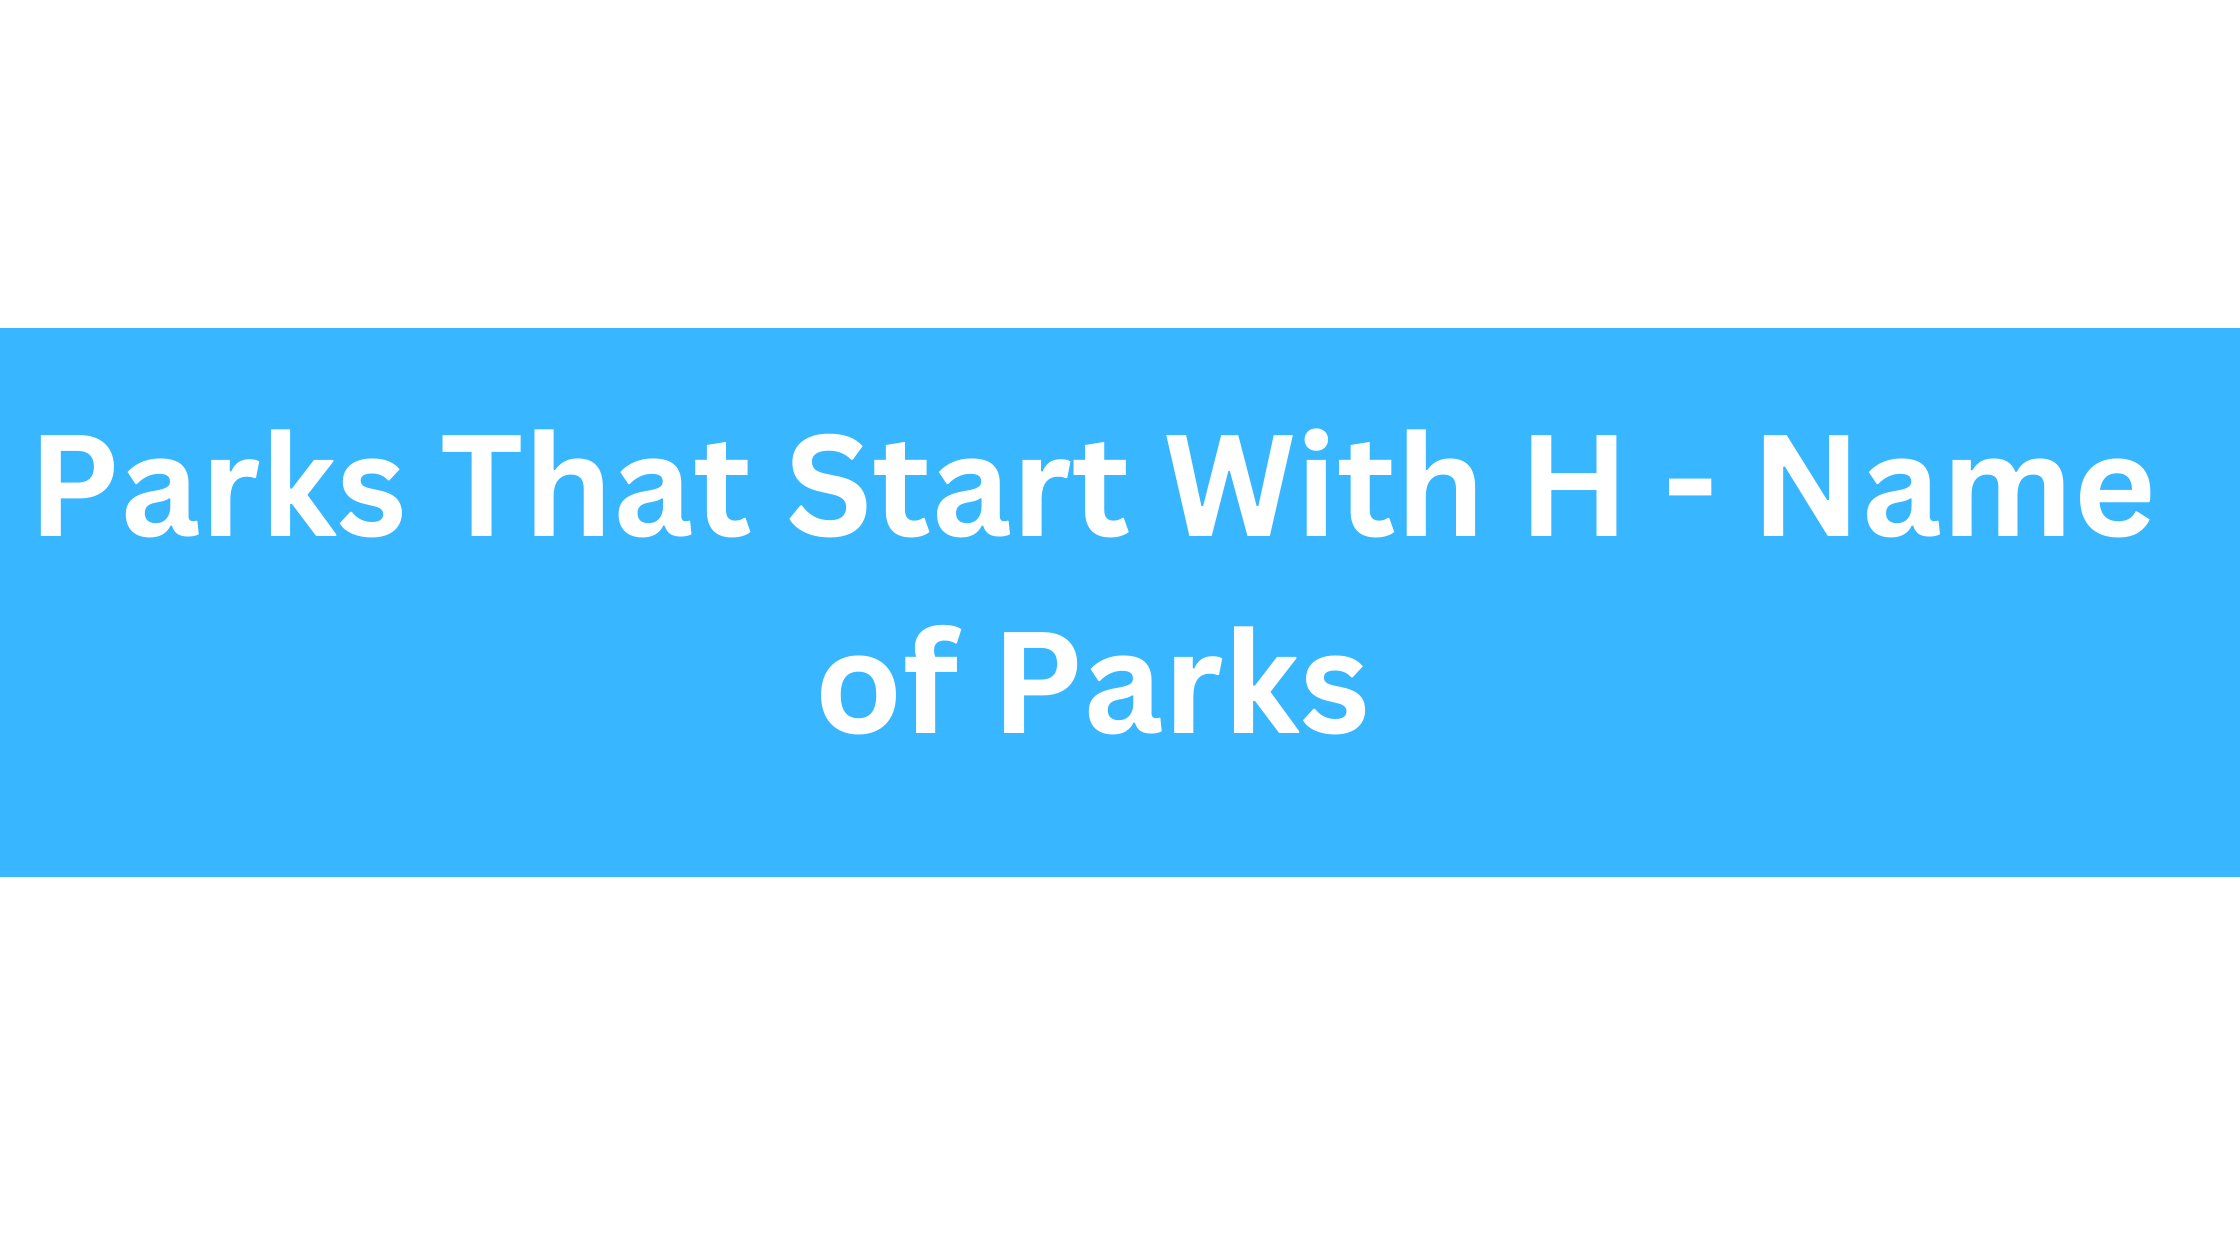 Parks That Start With H